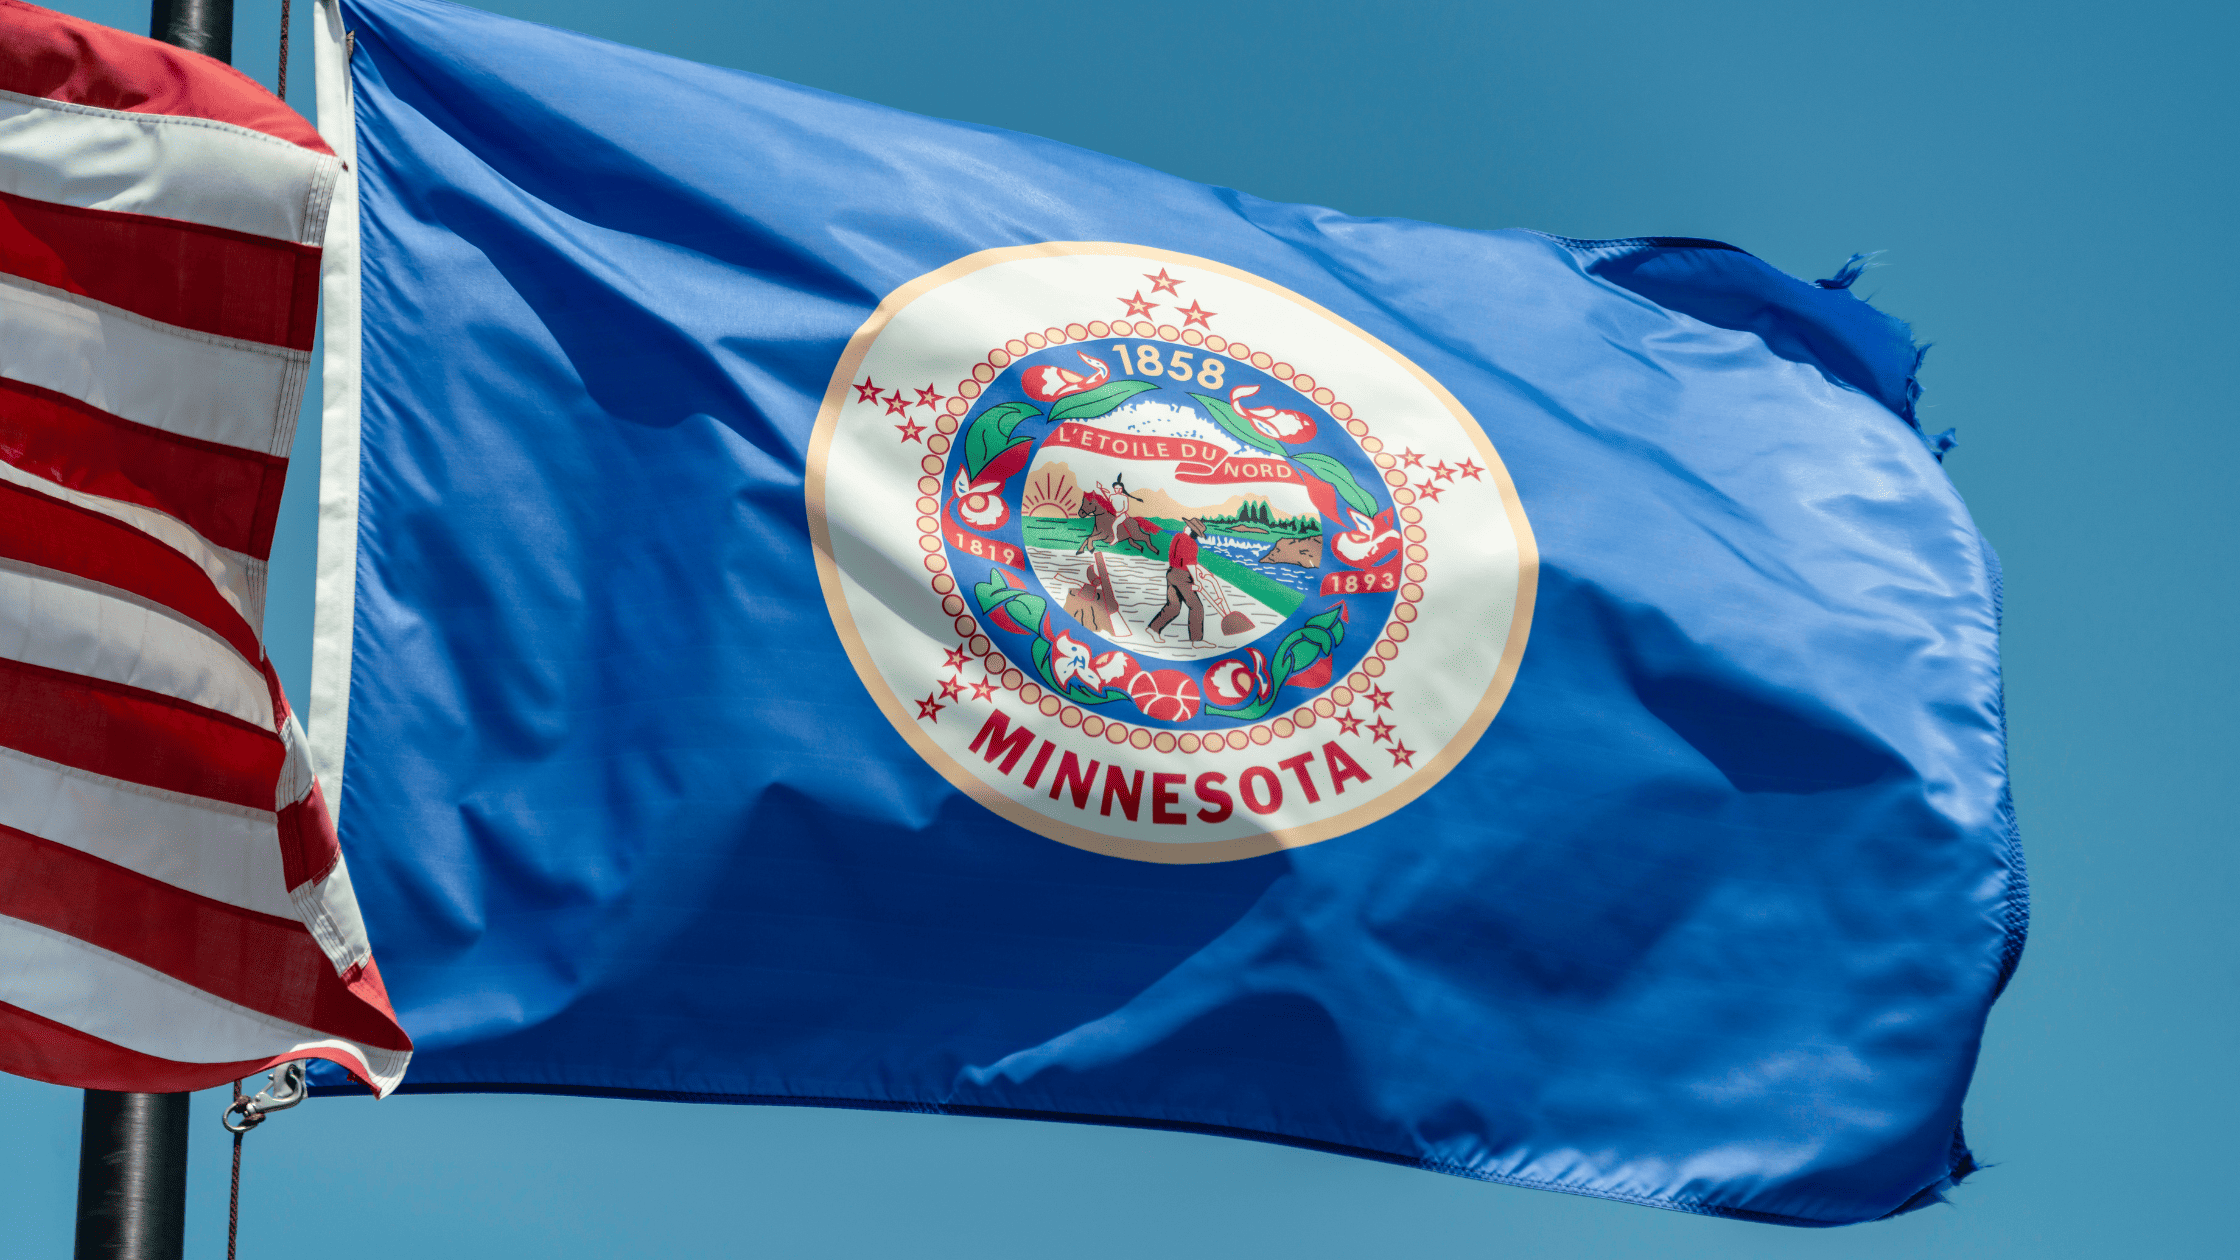 Minnesota's Bold Move: Why the State Adopted a New Flag